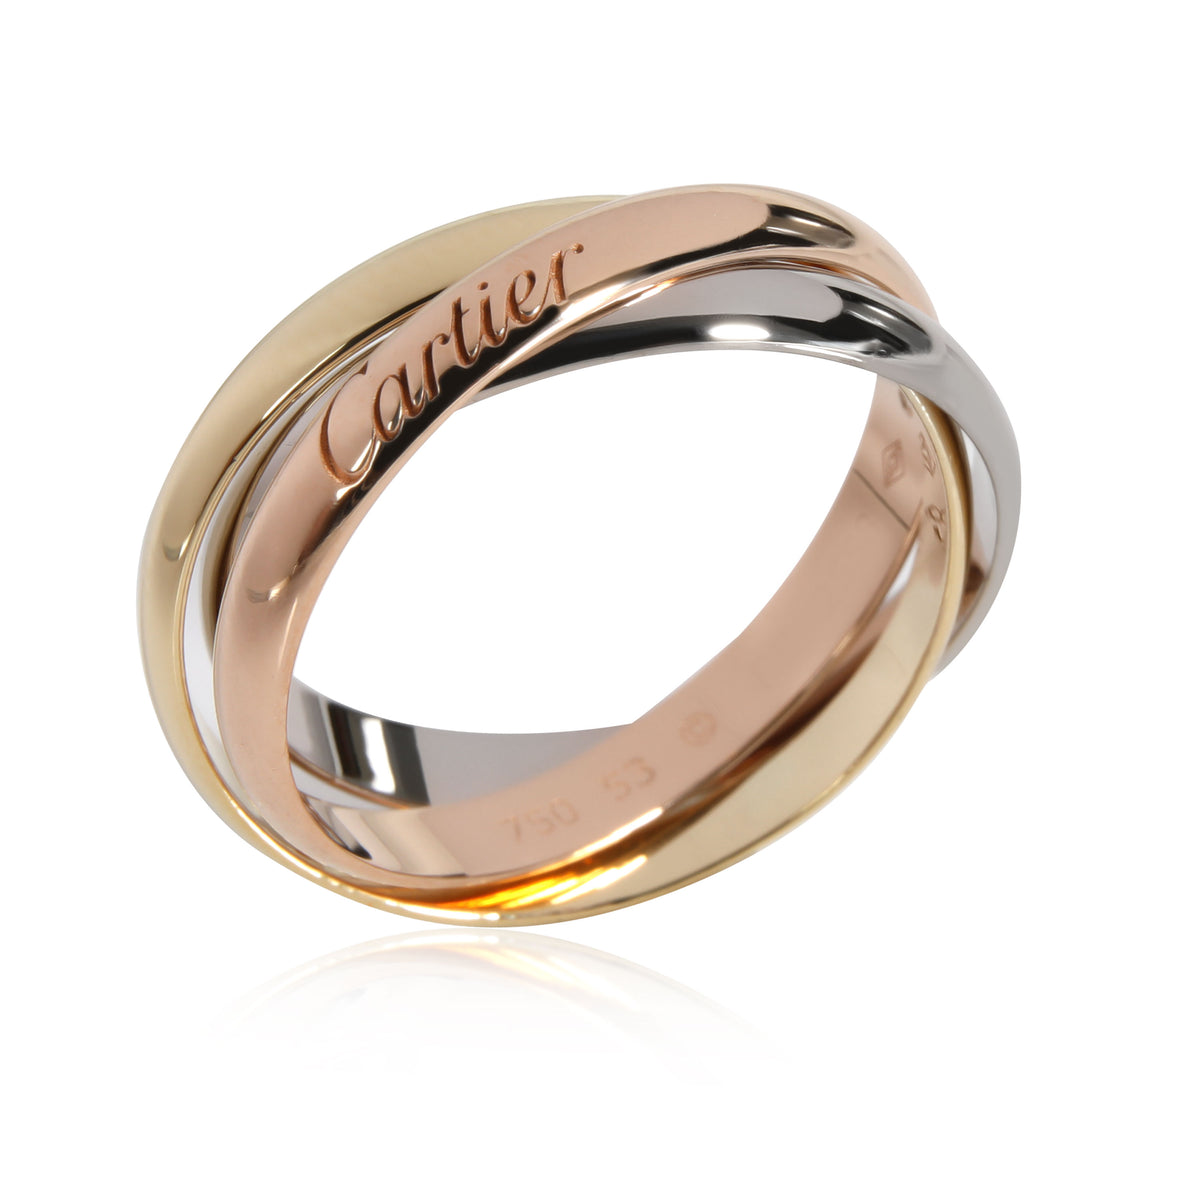 Cartier Trinity Ring in 18K 3 Tone Gold